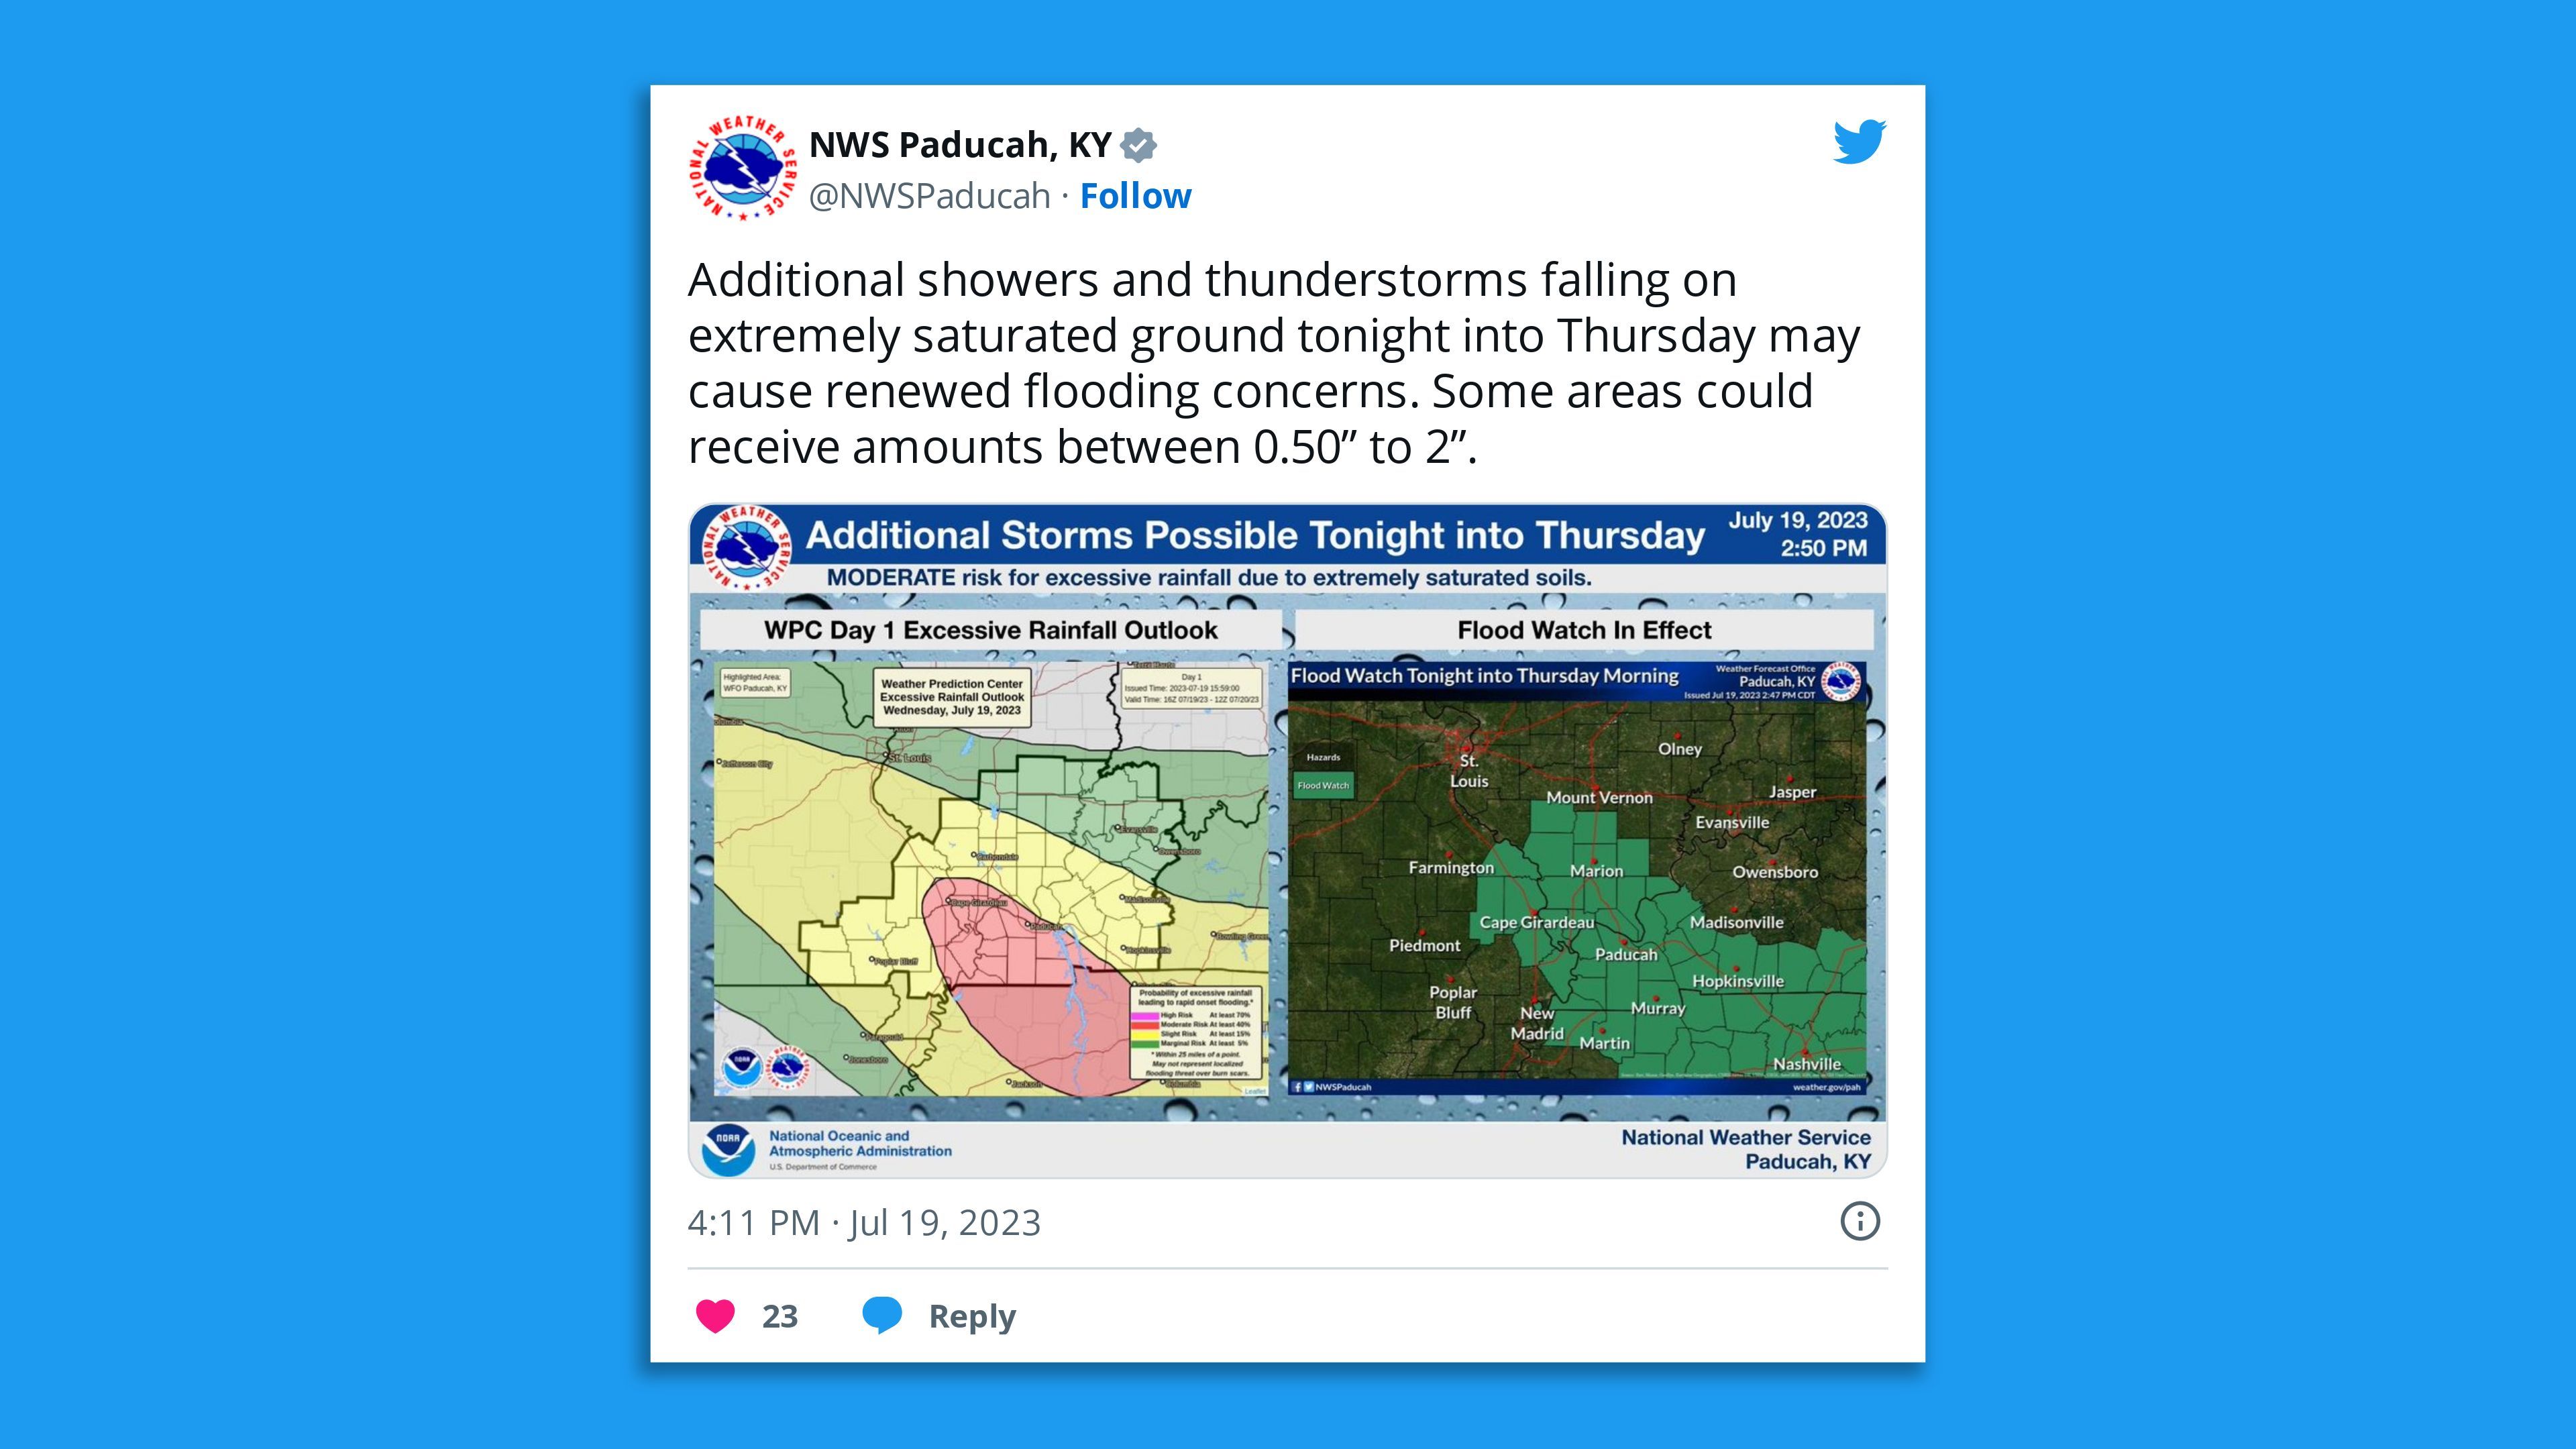 A screenshot of an NWS Paducah tweet saying: "Additional showers and thunderstorms falling on extremely saturated ground tonight into Thursday may cause renewed flooding concerns. Some areas could receive amounts between 0.50” to 2”."